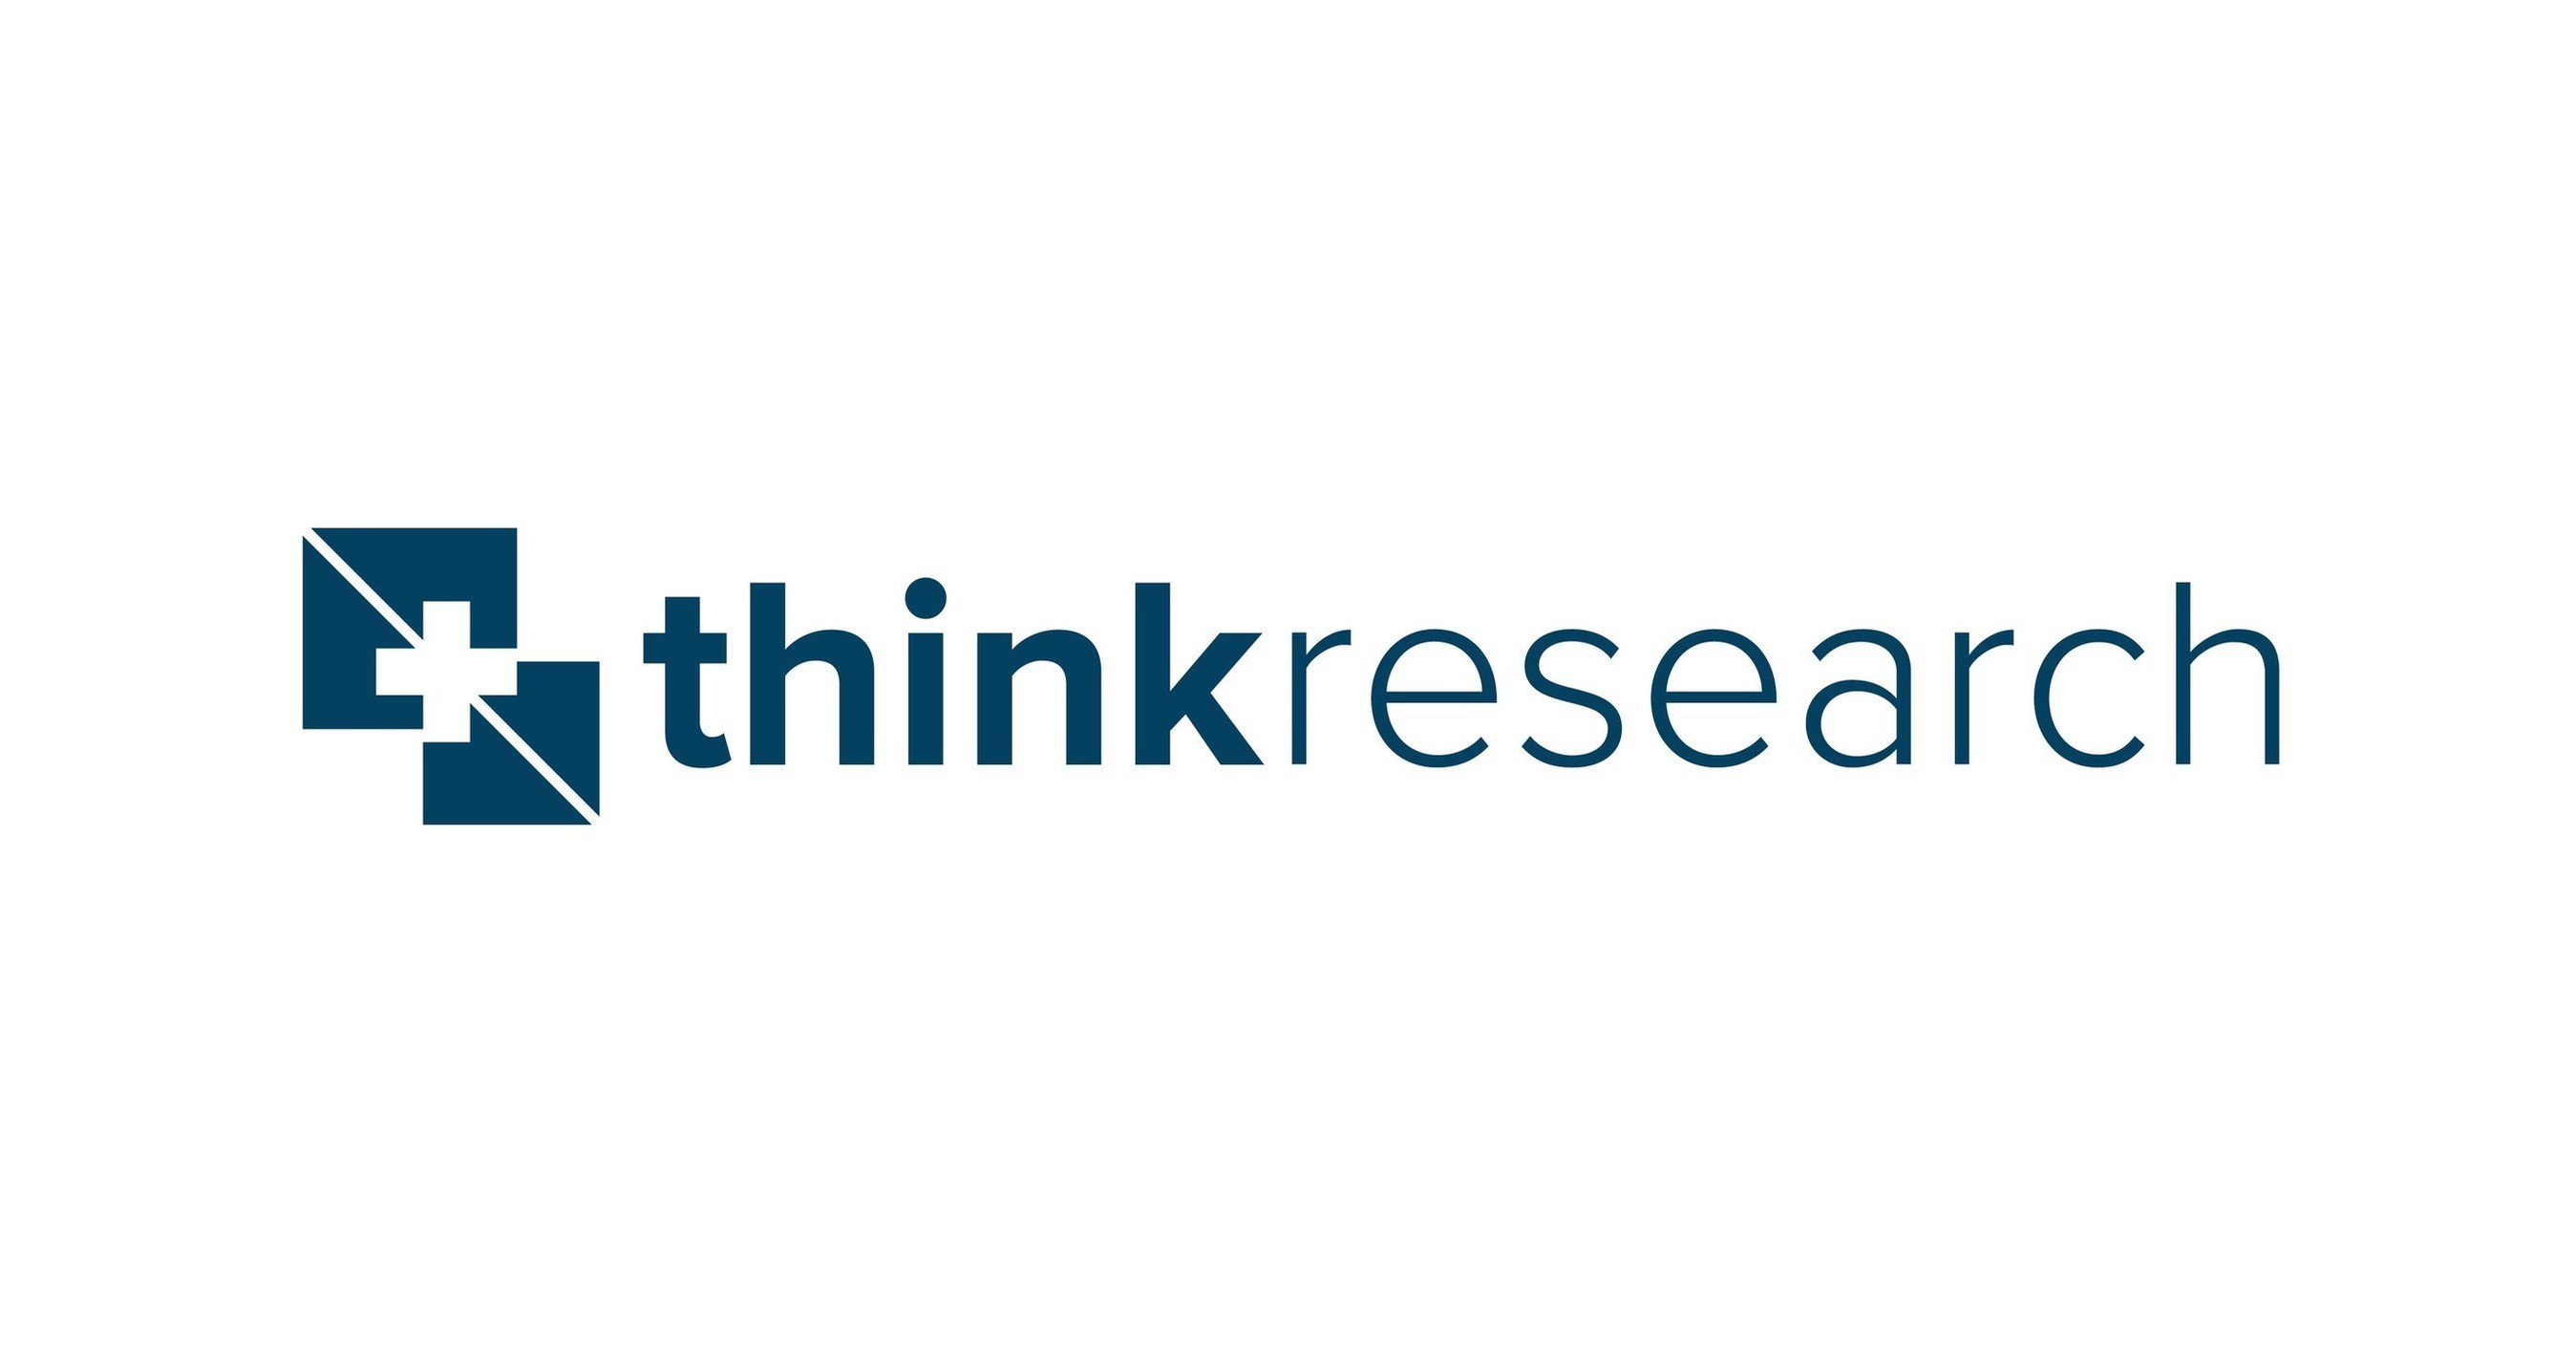 think research corporation stock